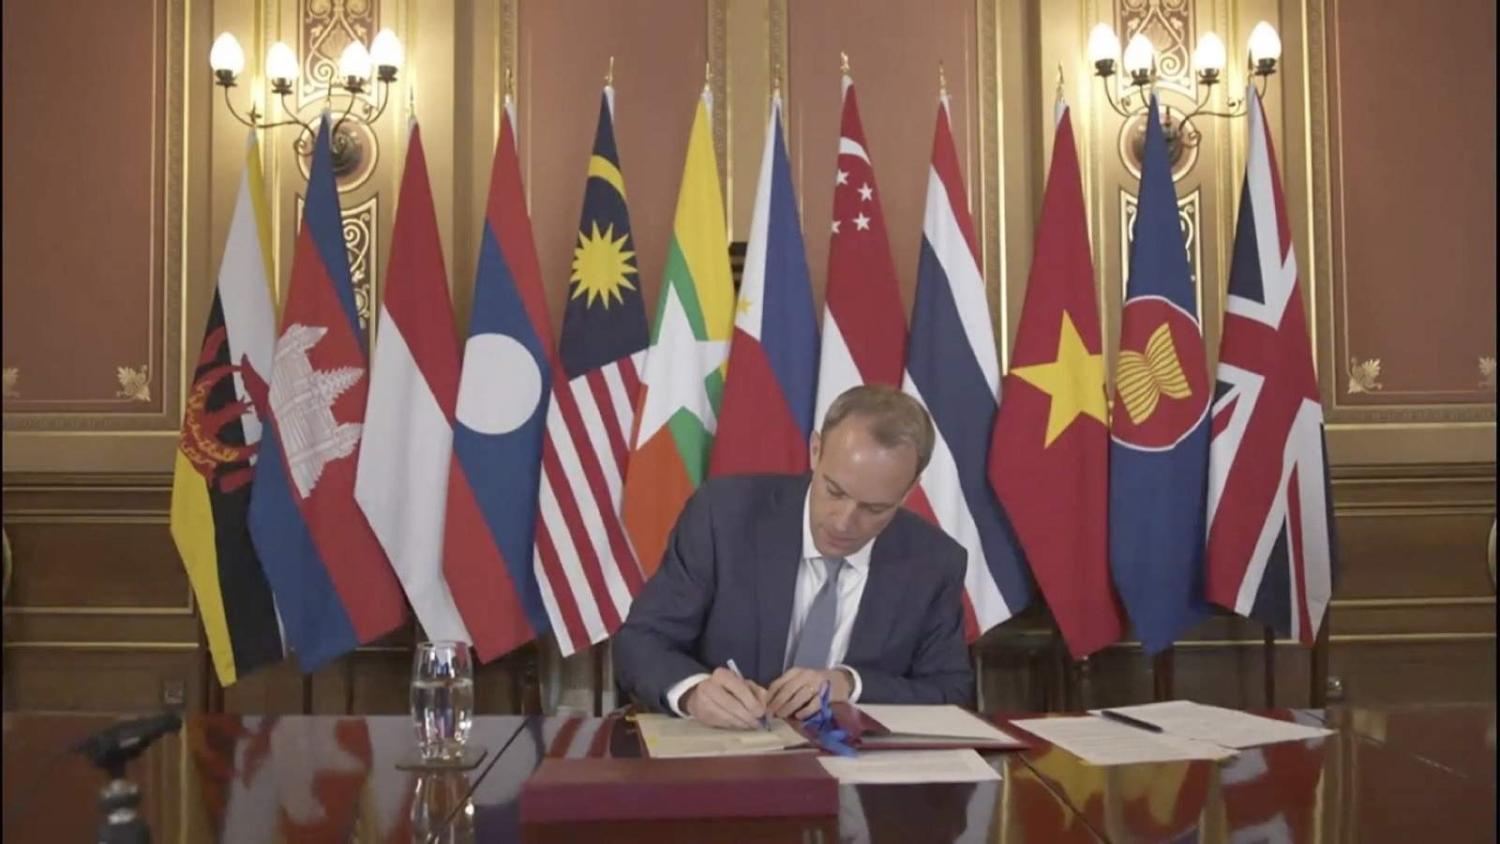 UK Foreign Secretary Dominic Raab co-signs the conferment of the UK to ASEAN Dialogue Partner Status, decided at the 54th ASEAN Foreign Ministers’ Meeting (AMM), 2 August 2021 (ASEAN Secretariat/Kusuma Pandu Wijaya/Getty Images)